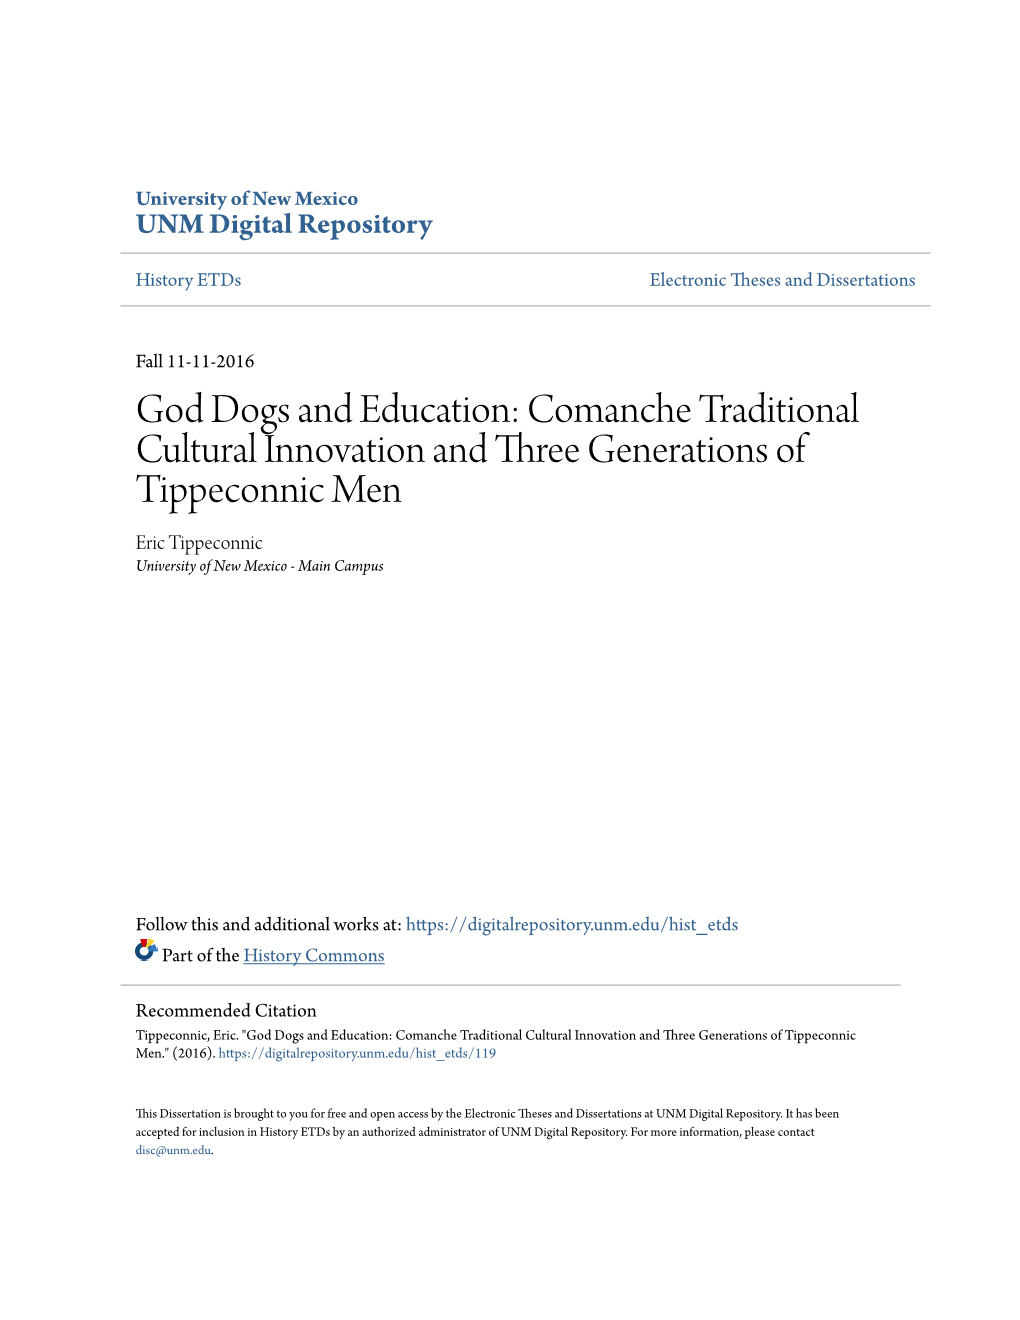 God Dogs and Education: Comanche Traditional Cultural Innovation and Three Generations of Tippeconnic Men Eric Tippeconnic University of New Mexico - Main Campus